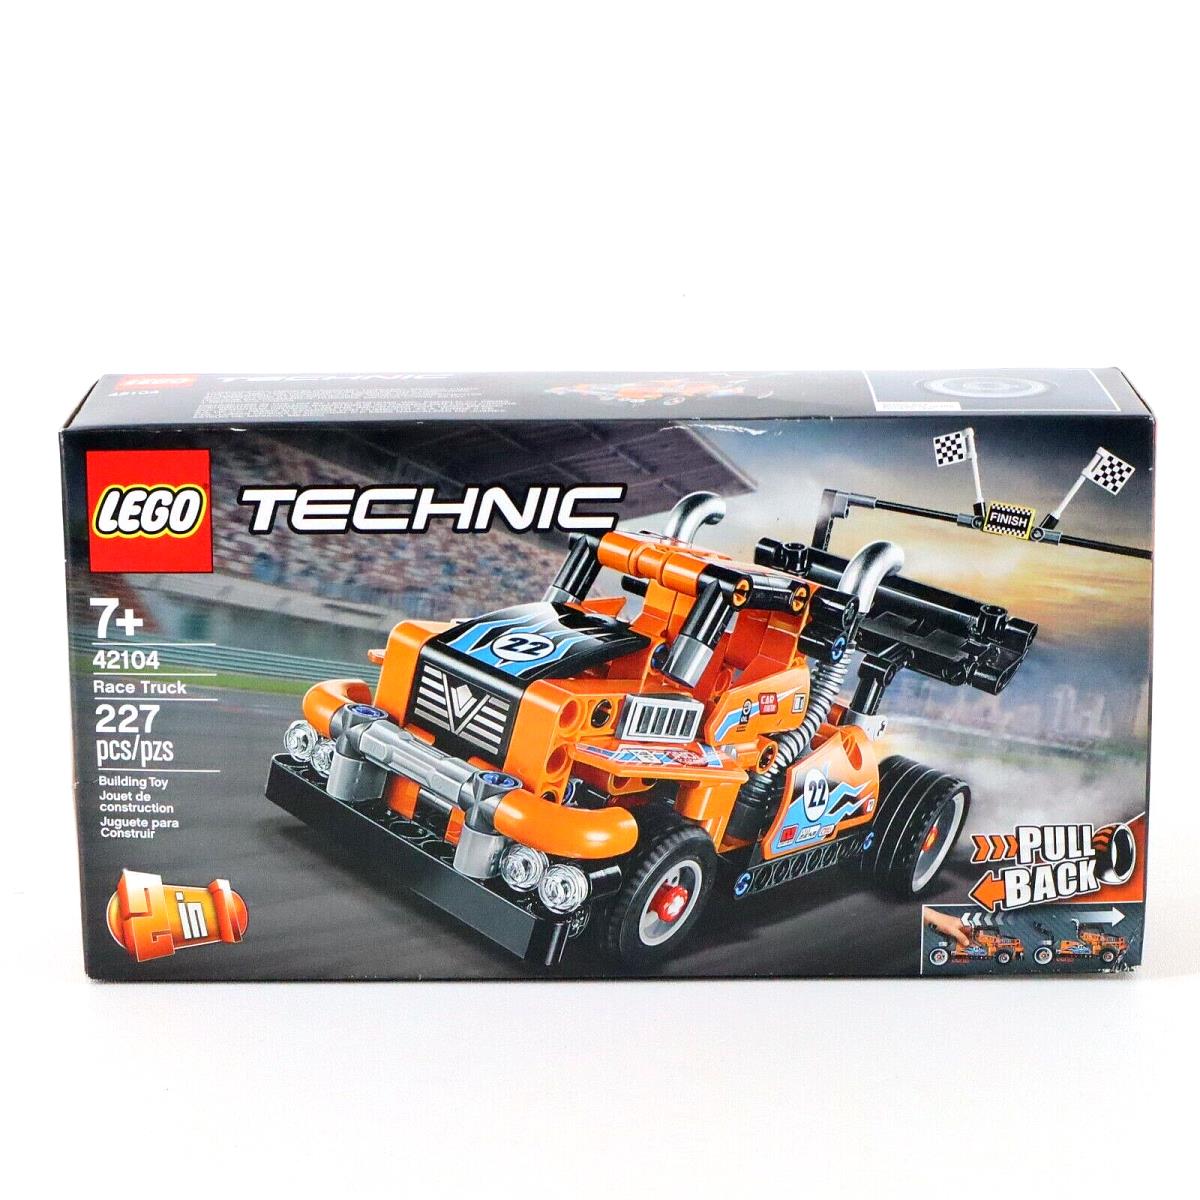 Lego Technic 42104 Race Truck 2 in 1 Pull Back Action 227pcs Retired